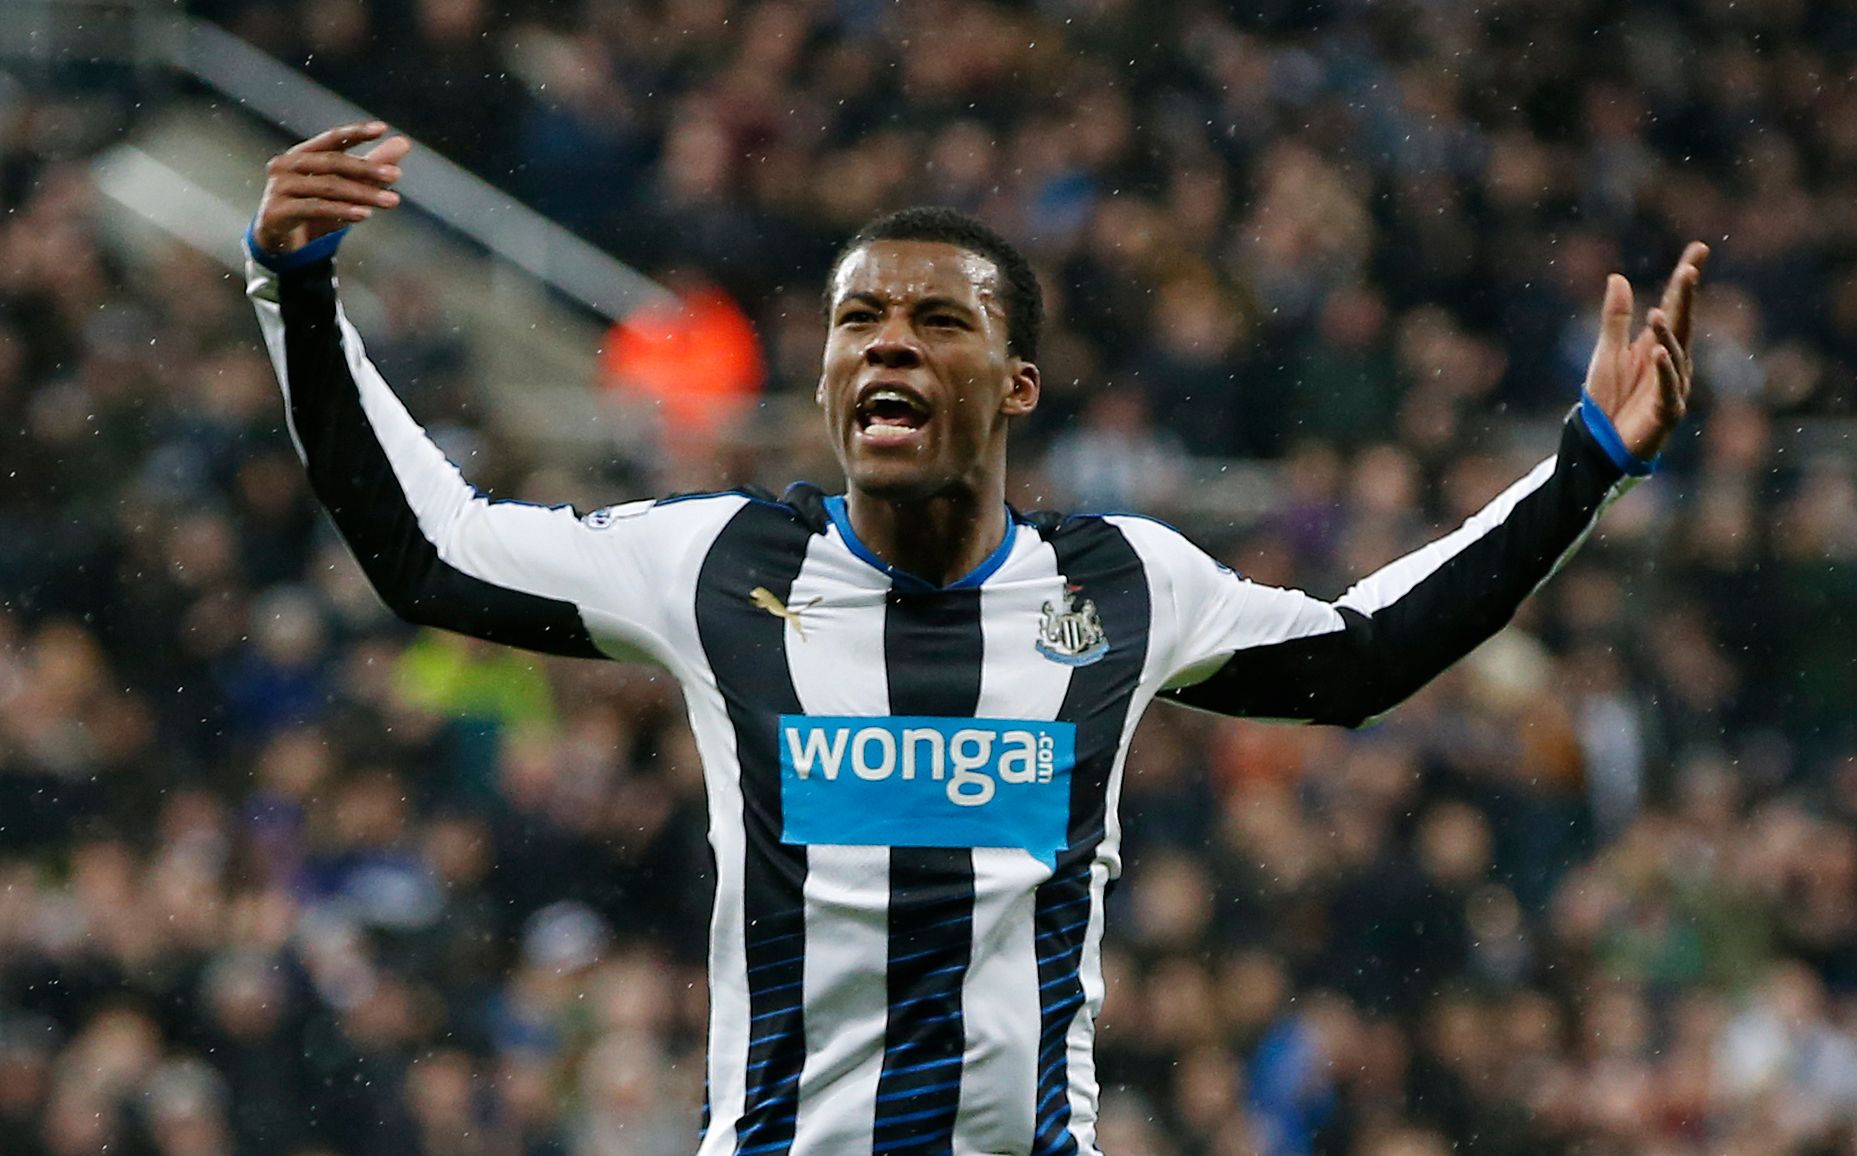 Football Soccer - Newcastle United v Manchester United - Barclays Premier League - St James' Park - 12/1/16 
Georginio Wijnaldum celebrates after scoring the first goal for Newcastle 
Reuters / Andrew Yates 
Livepic 
EDITORIAL USE ONLY. No use with unauthorized audio, video, data, fixture lists, club/league logos or 